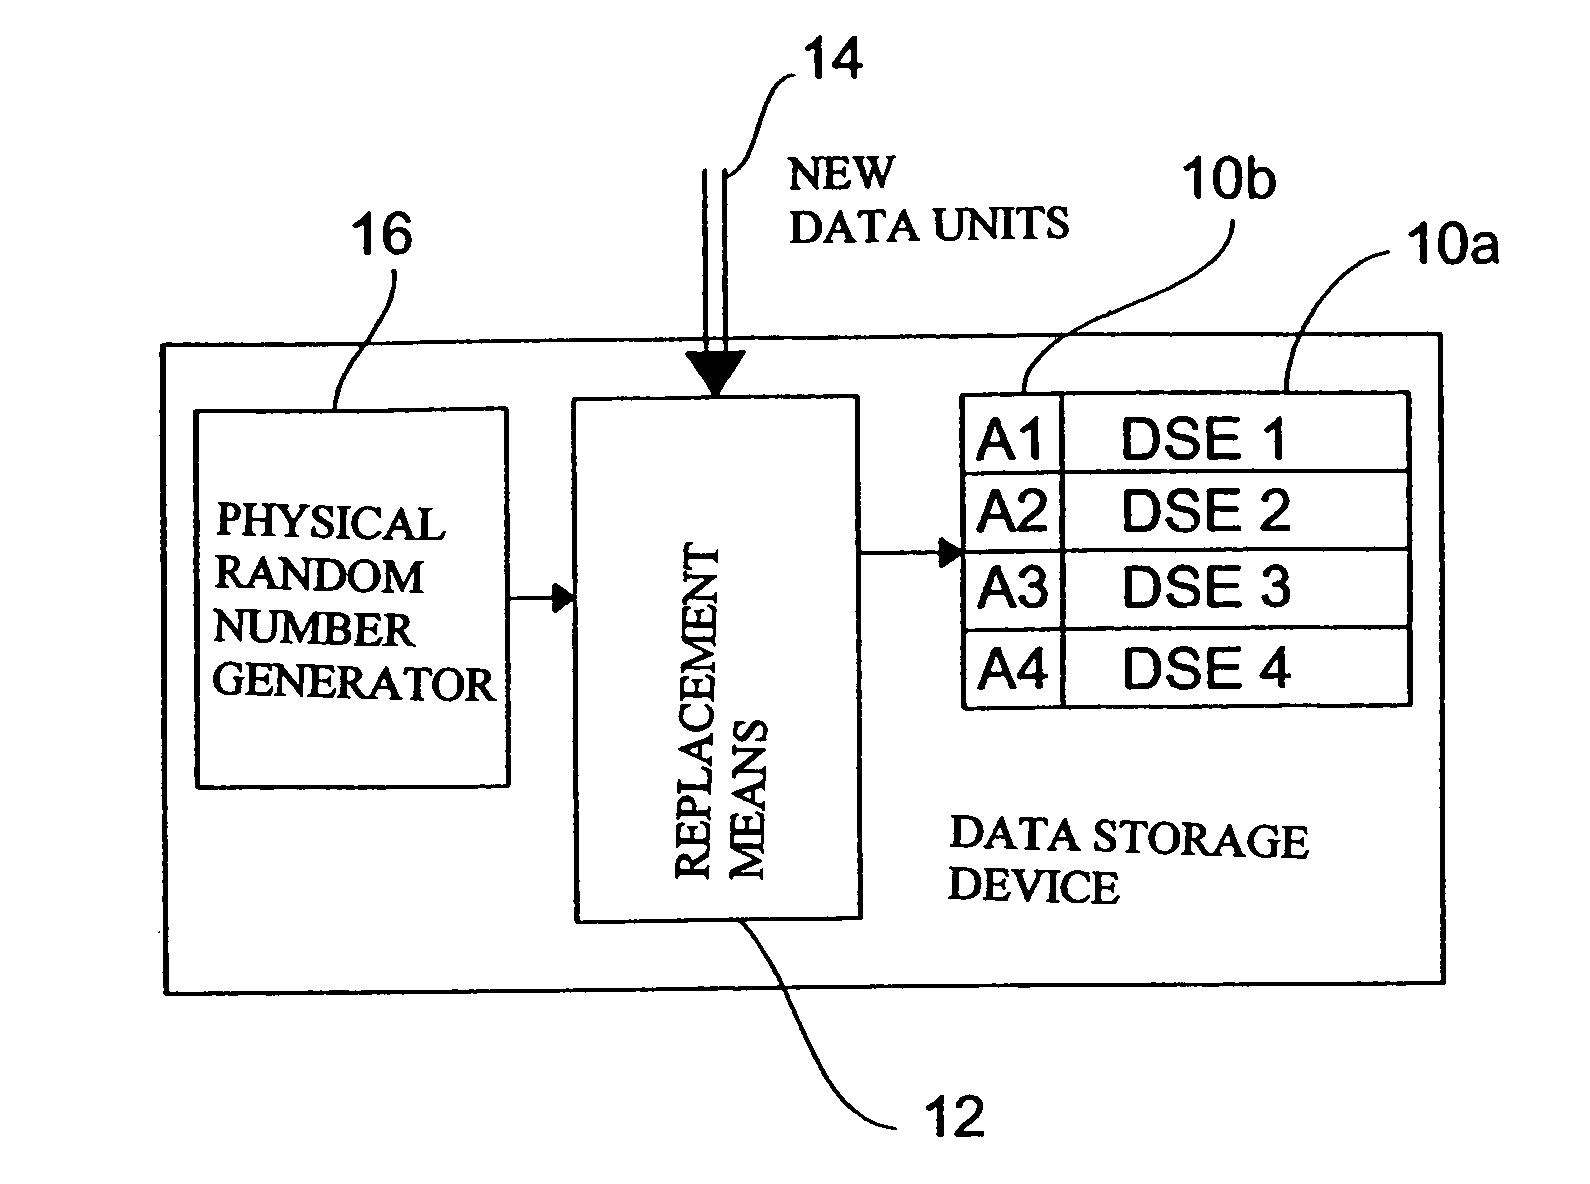 Method for replacing contents of a data storage unit